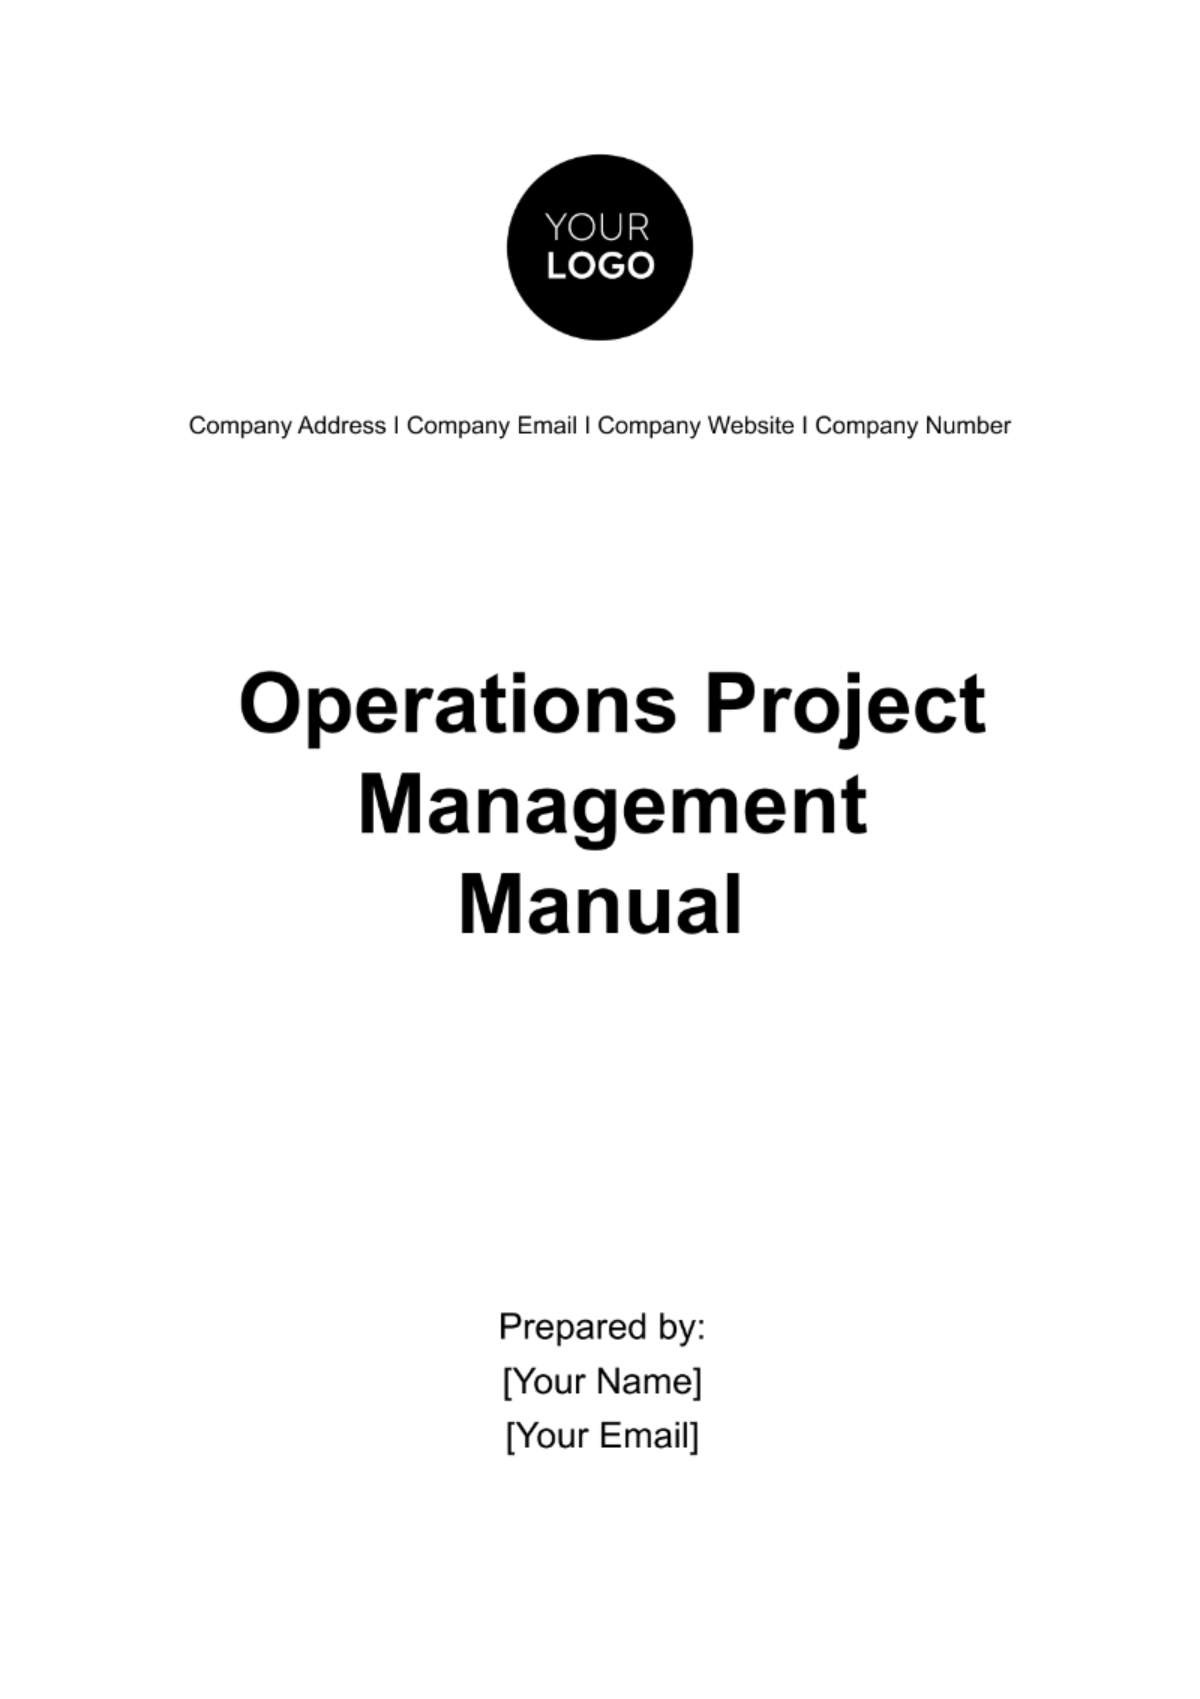 Operations Project Management Manual Template